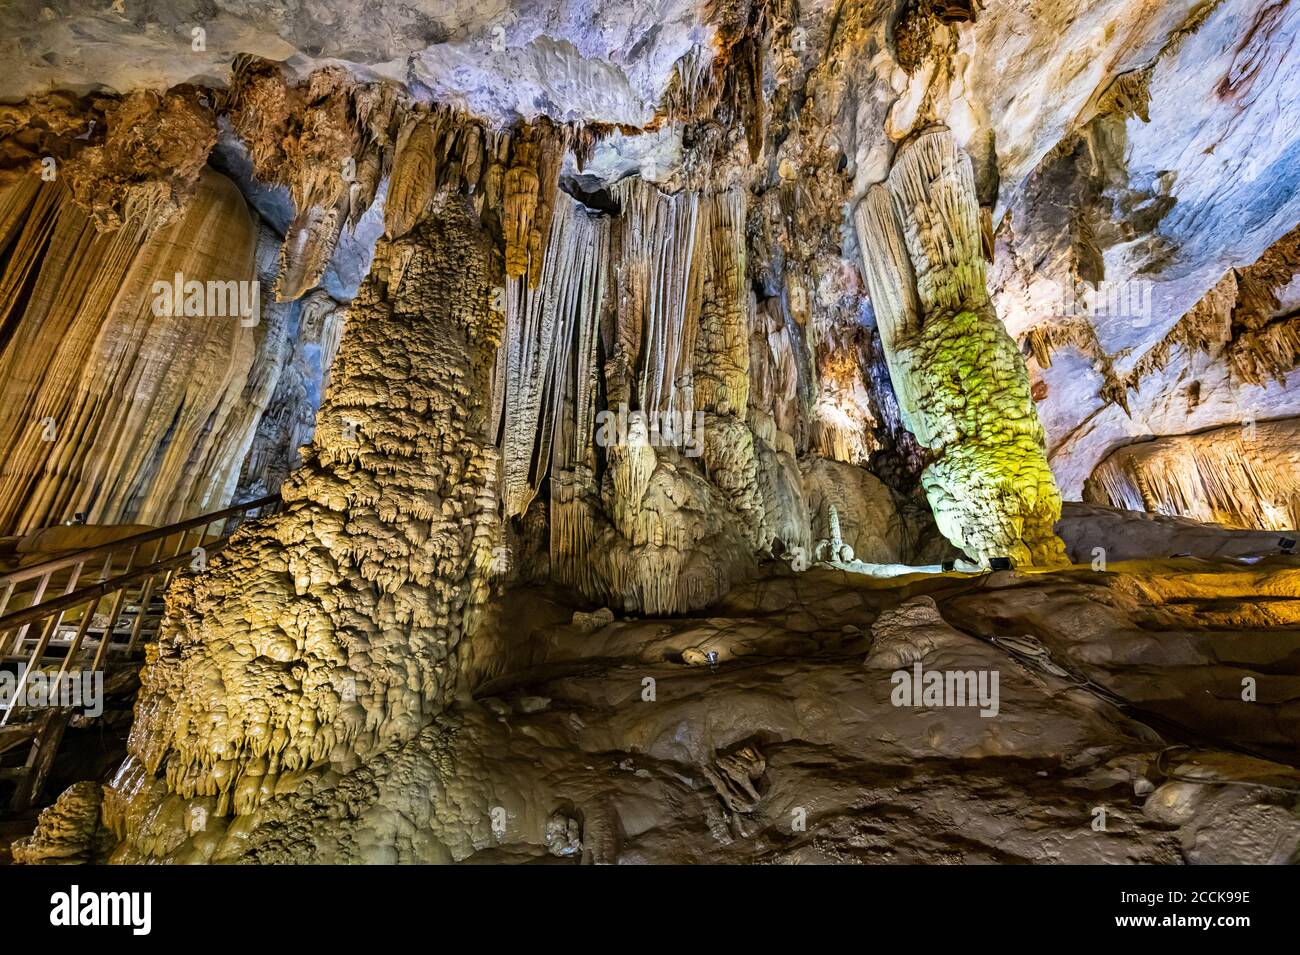 Vietnam, Quang Binh Province, Rock formations inside Paradise Cave Stock Photo